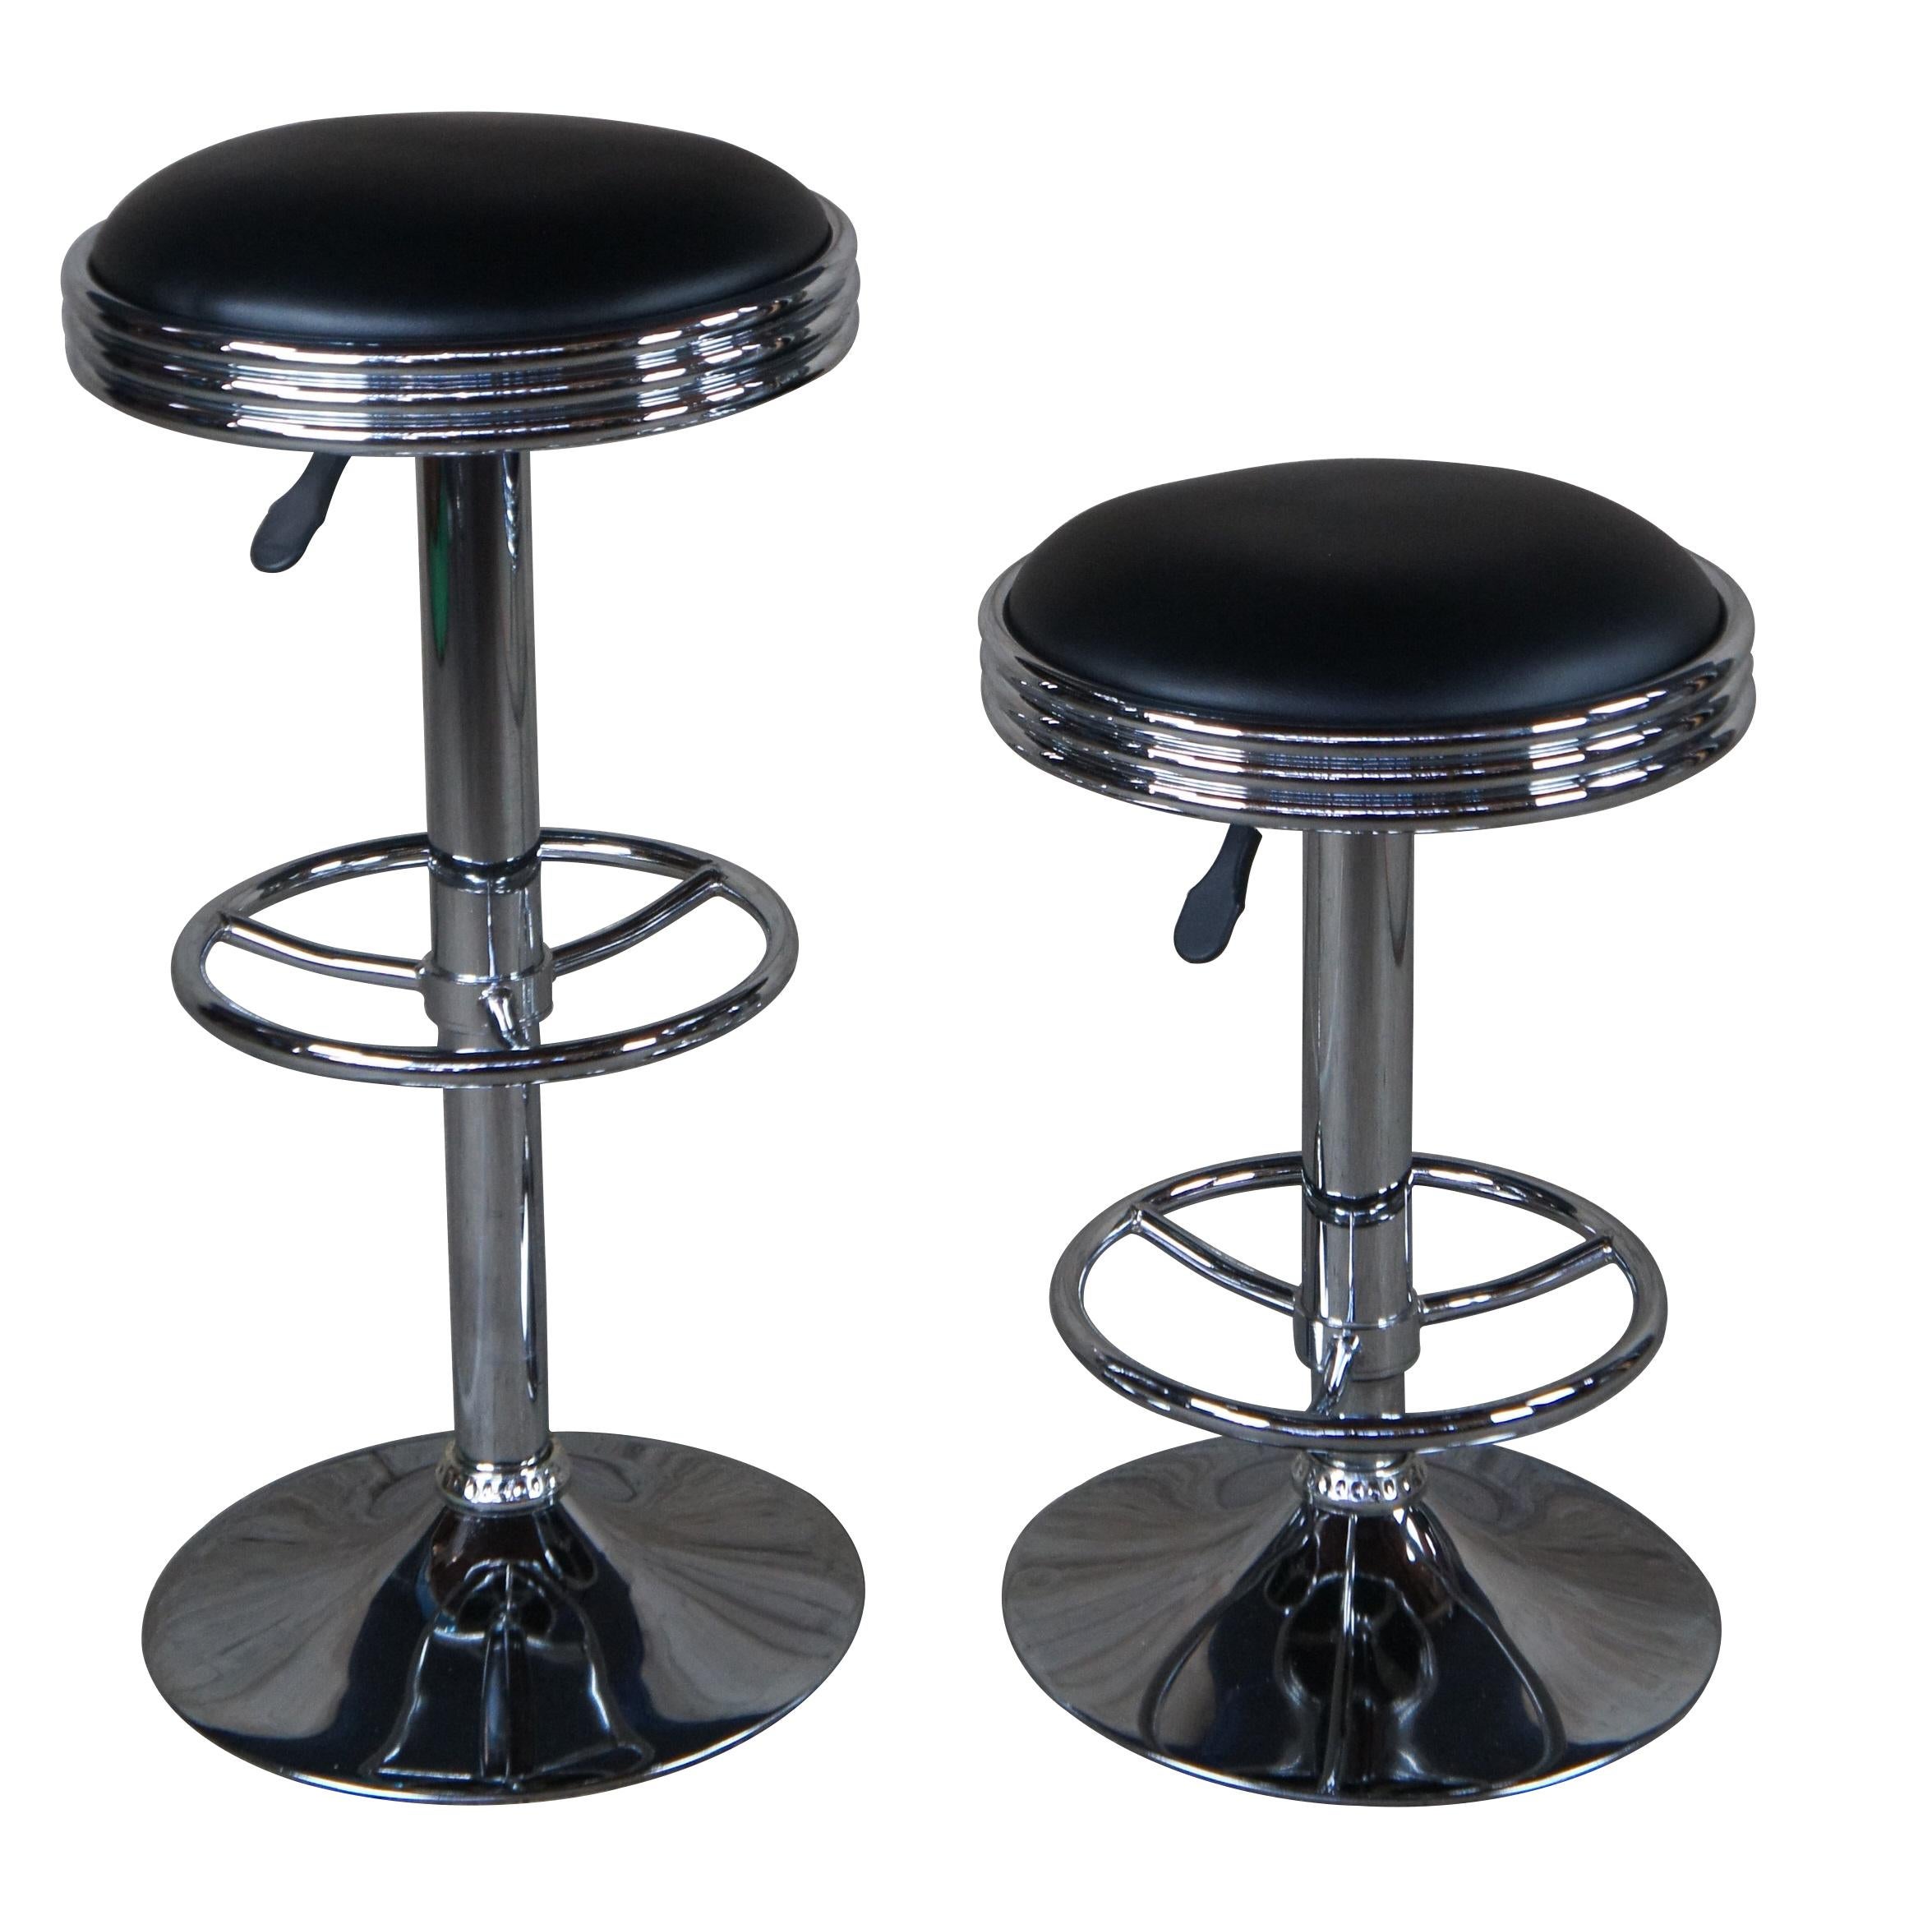 Six vintage adjustable swivel counter or bar stools featuring a 1950s diner vibe with circular black seat and tubular chrome frame.

Dimensions:
16